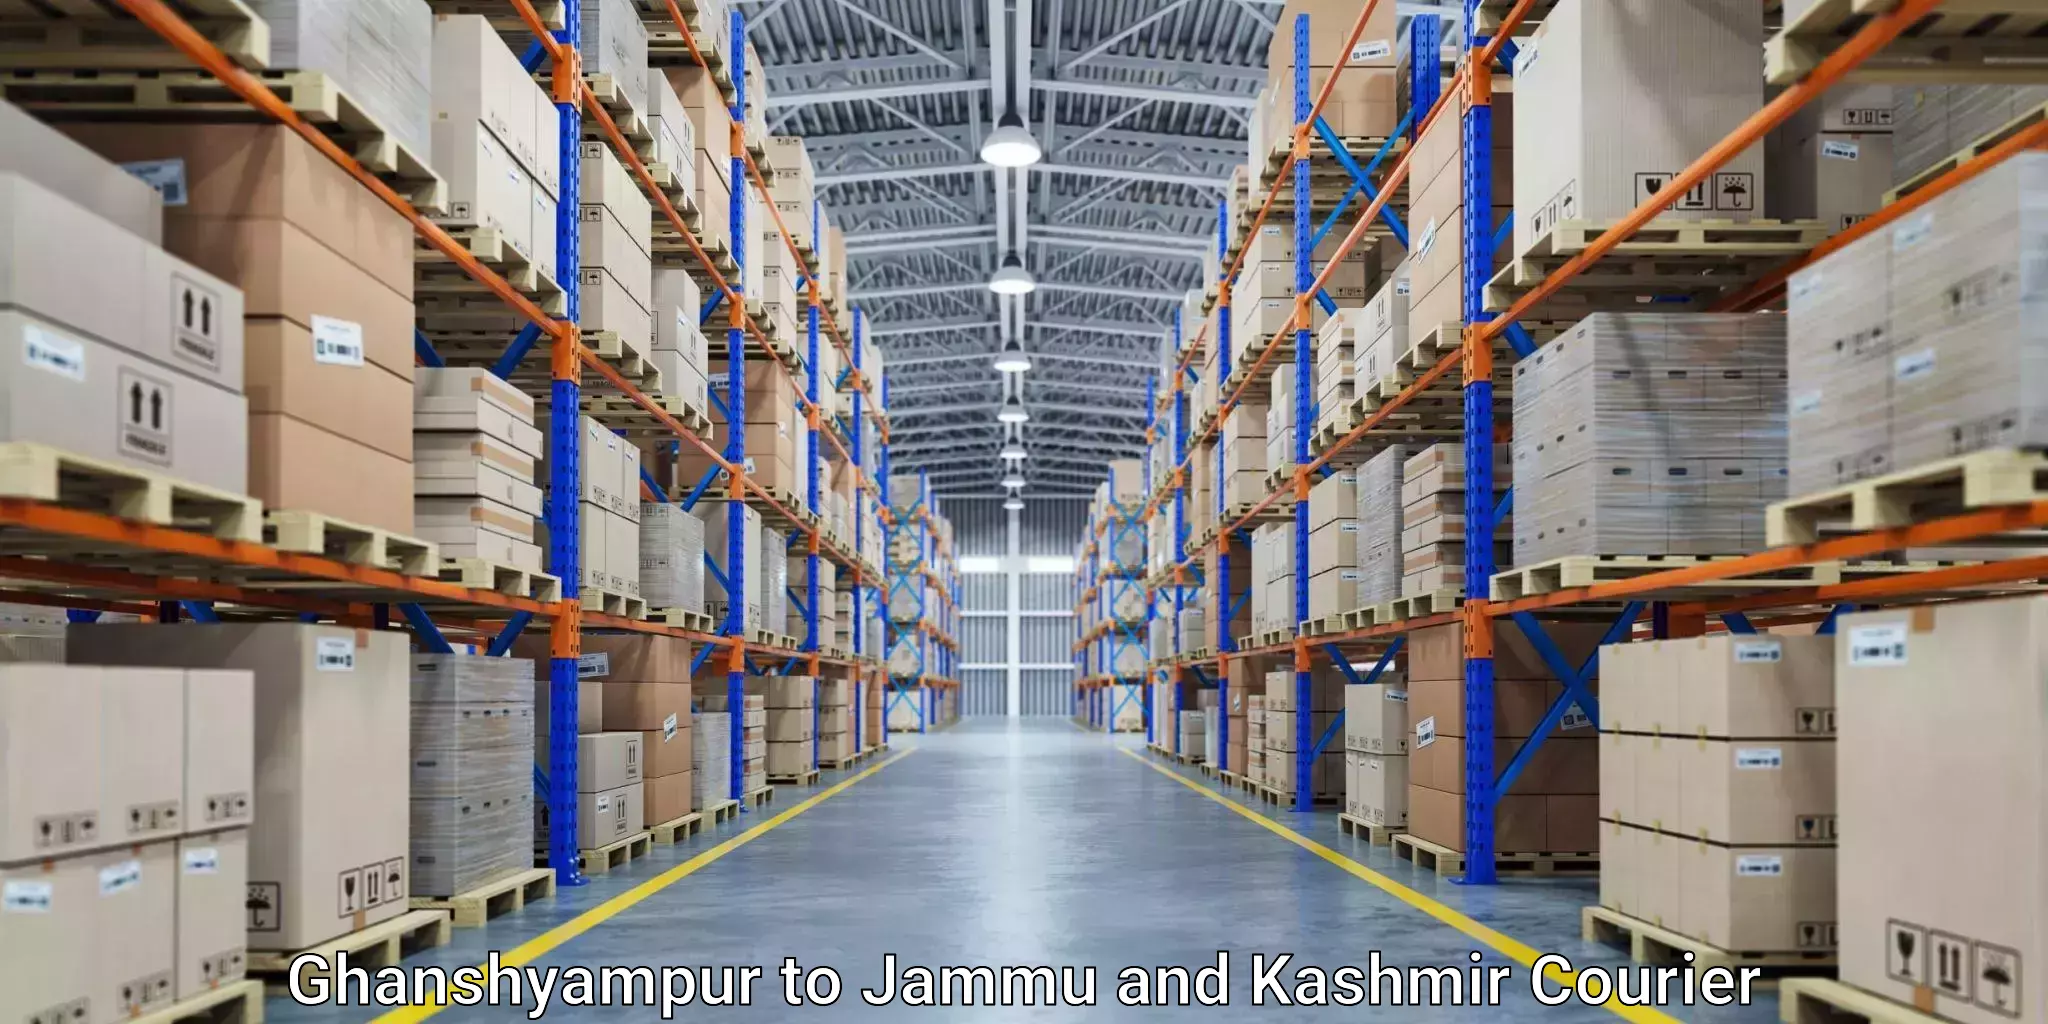 Sustainable shipping practices in Ghanshyampur to Kargil